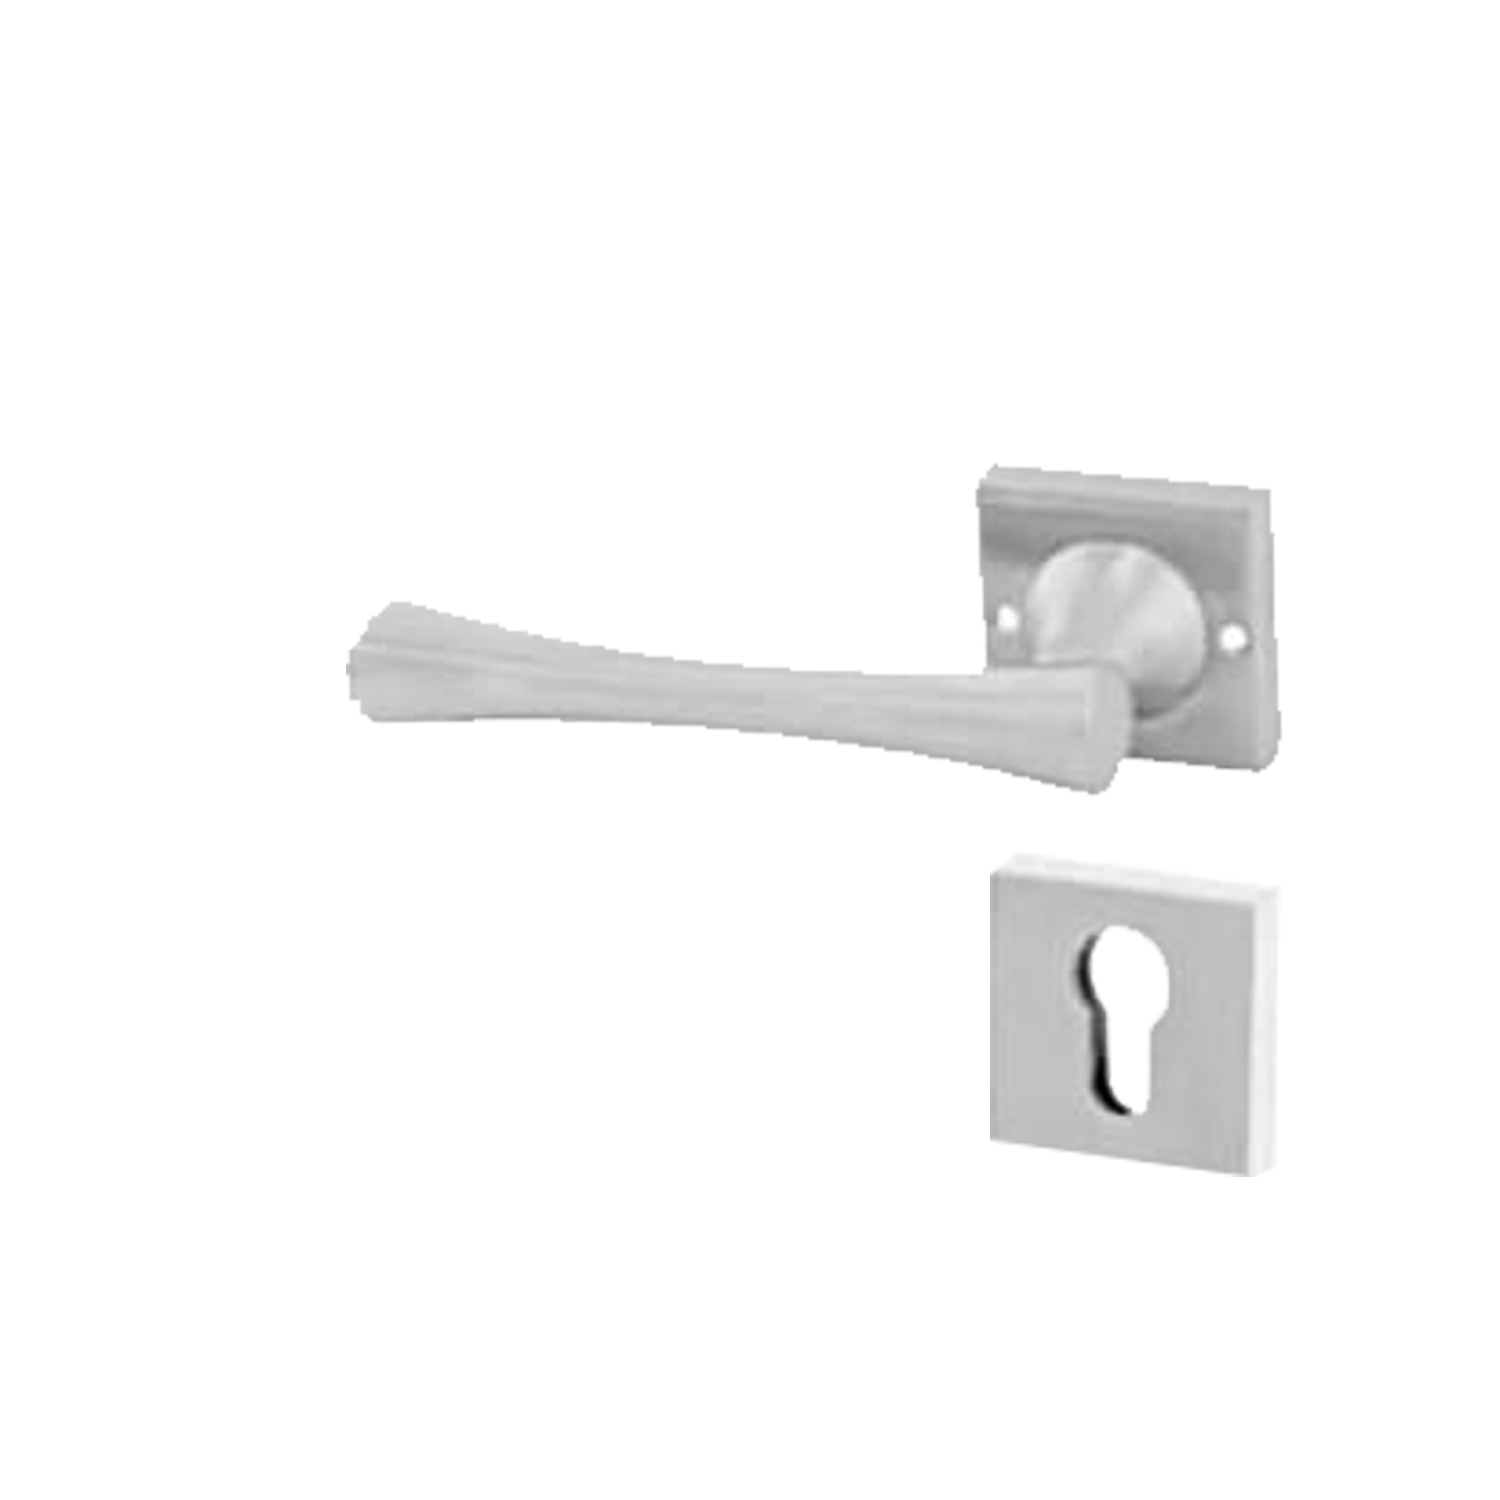 SES HDL 2510 SUS 304 SS - Handle